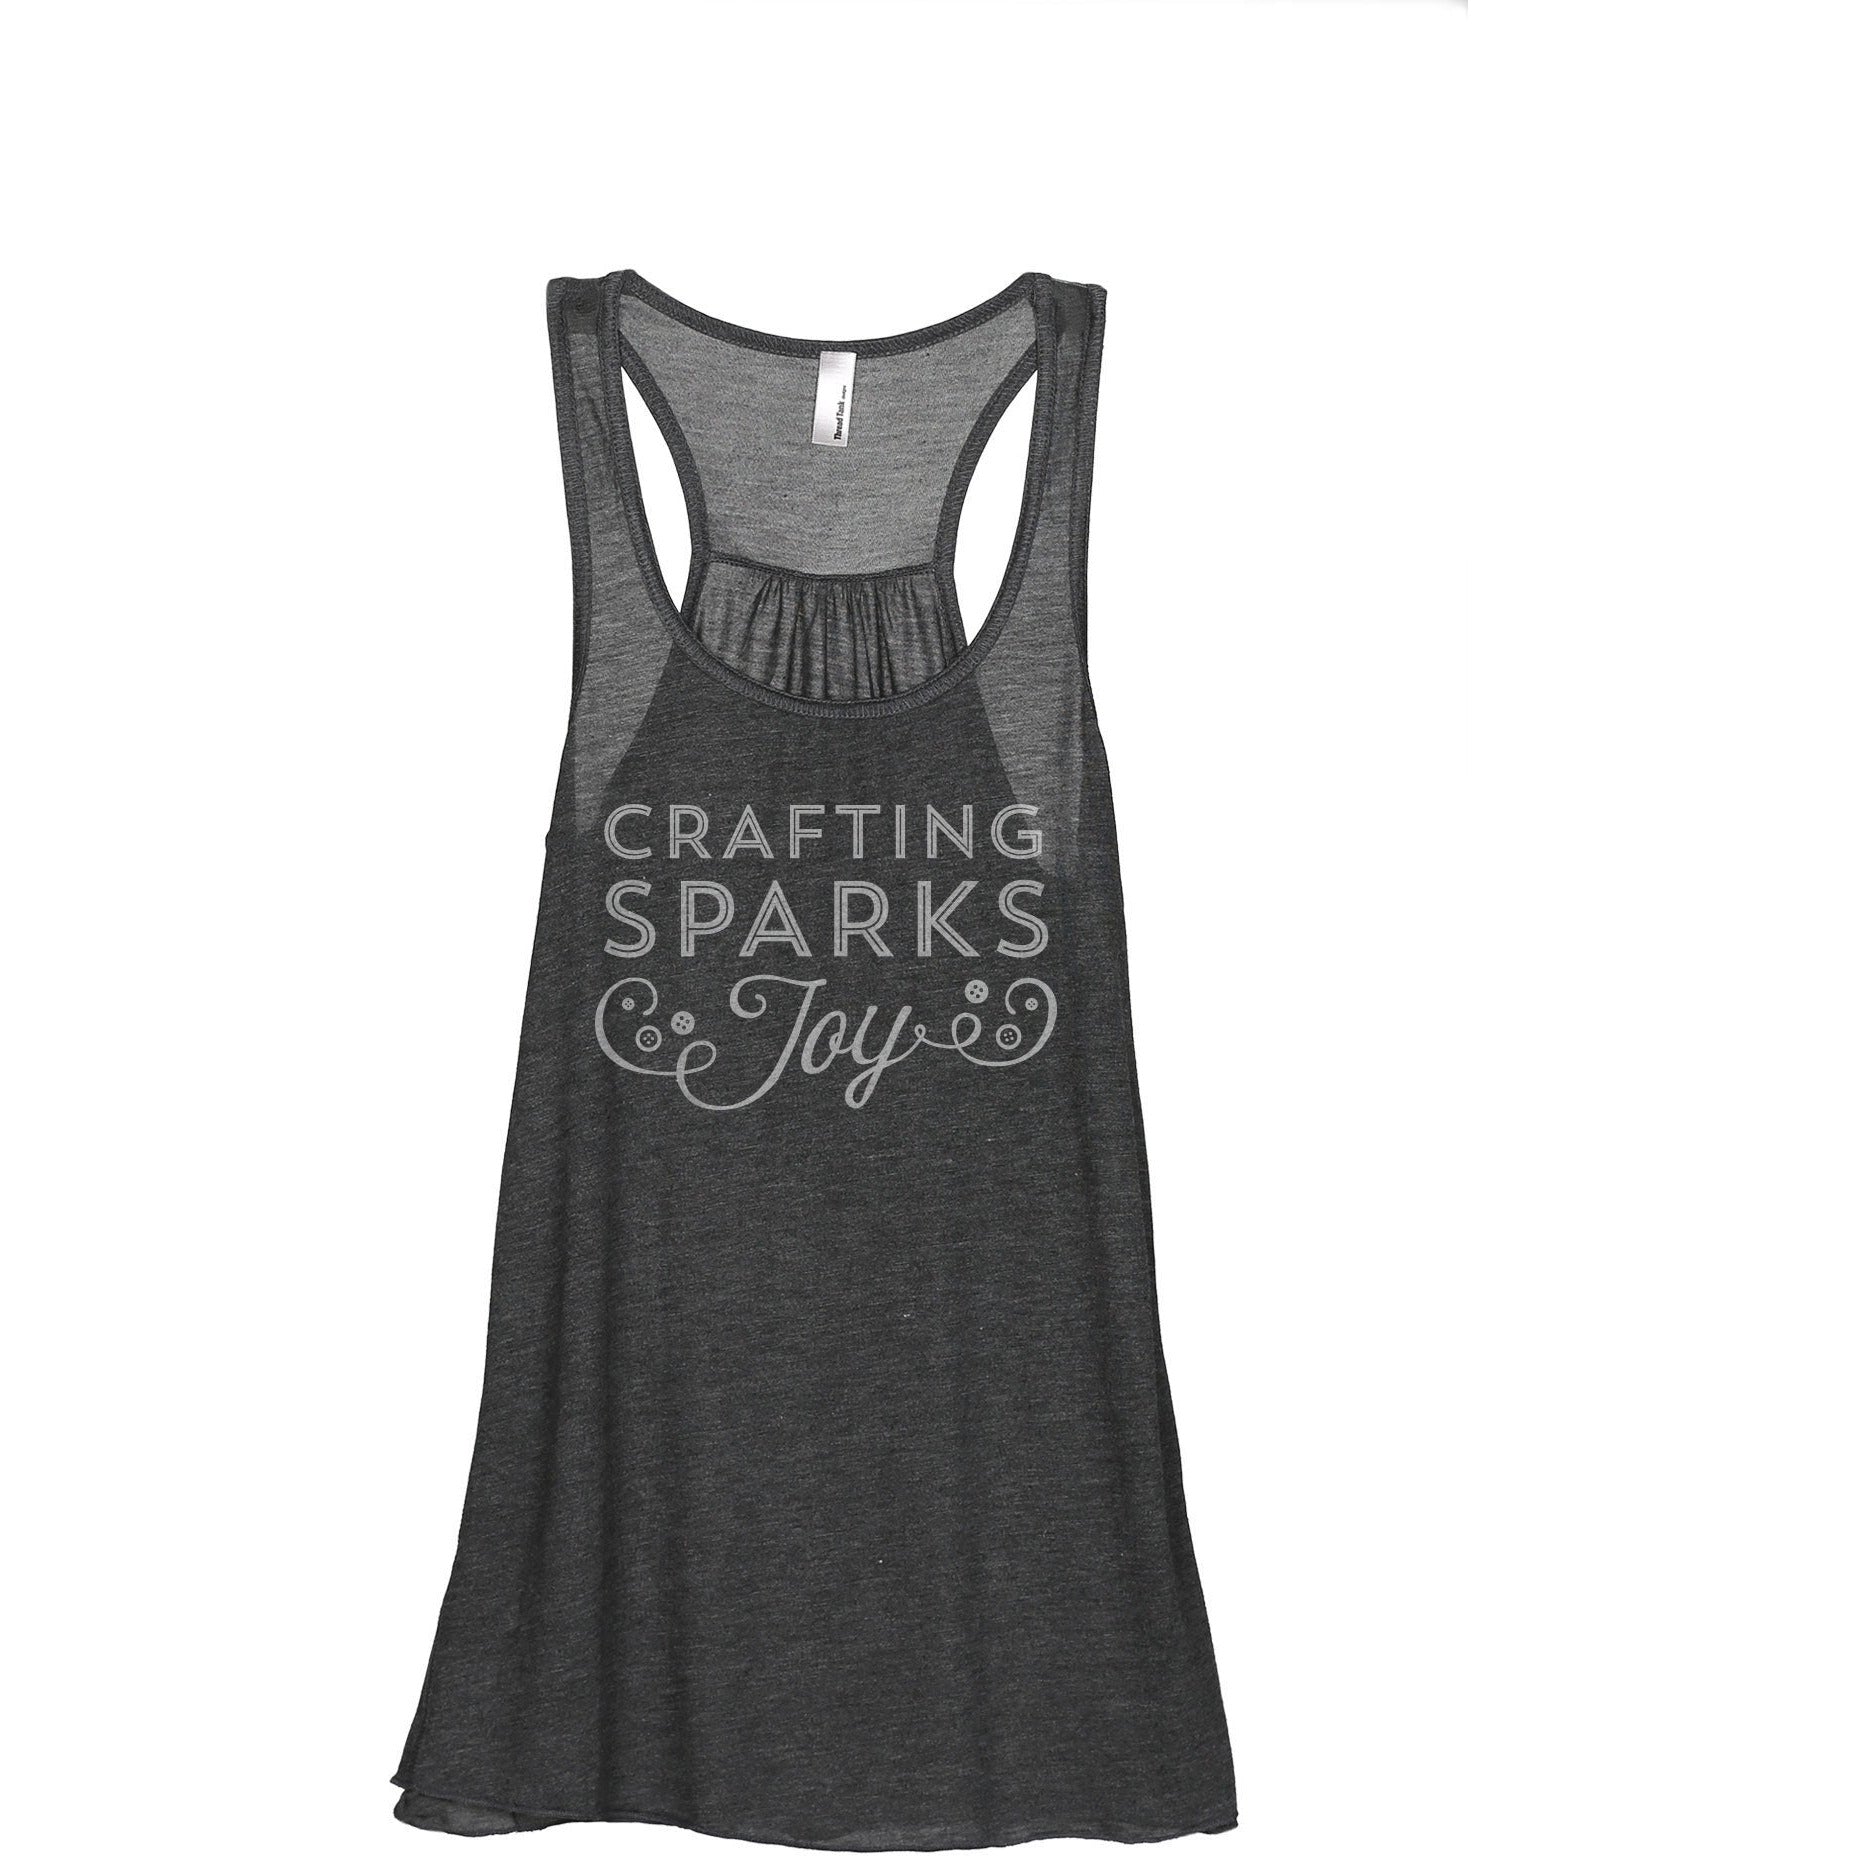 Crafting Sparks Joy Women's Relaxed Flowy Racerback Tank Tee Charcoal